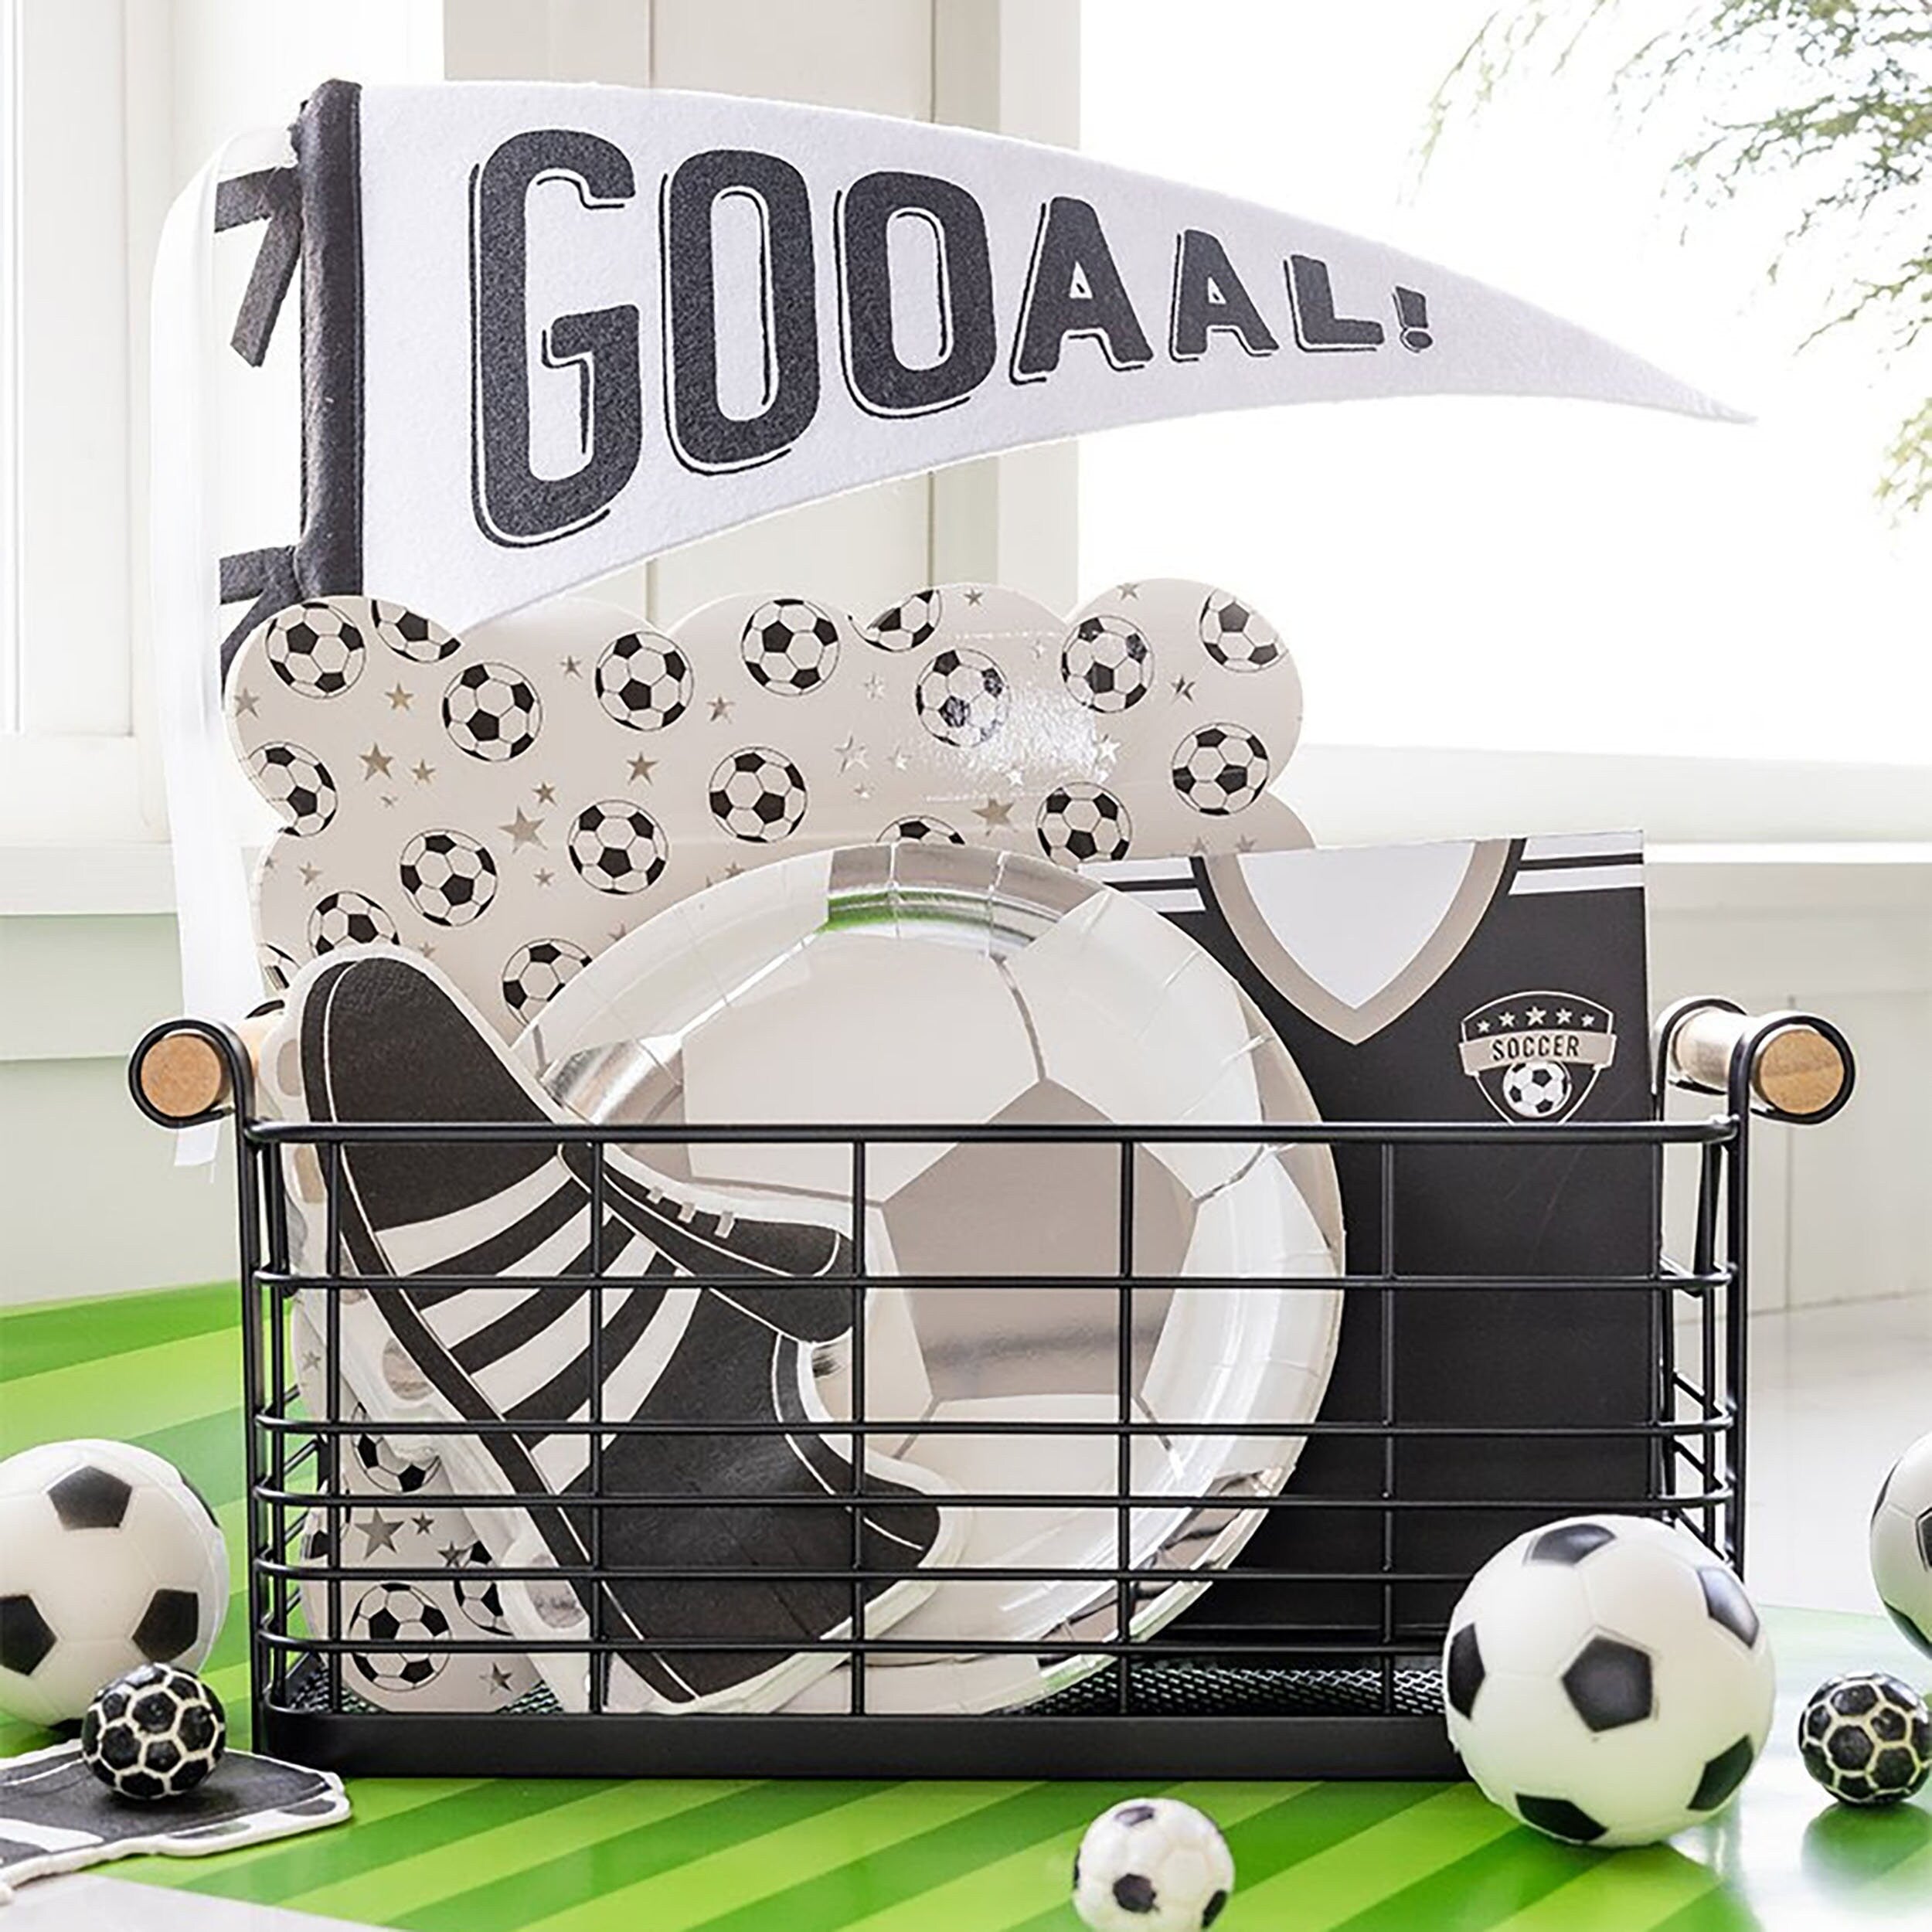 Soccer Birthday Party Supplies, Plates, Napkins, Party Favors and Decorations